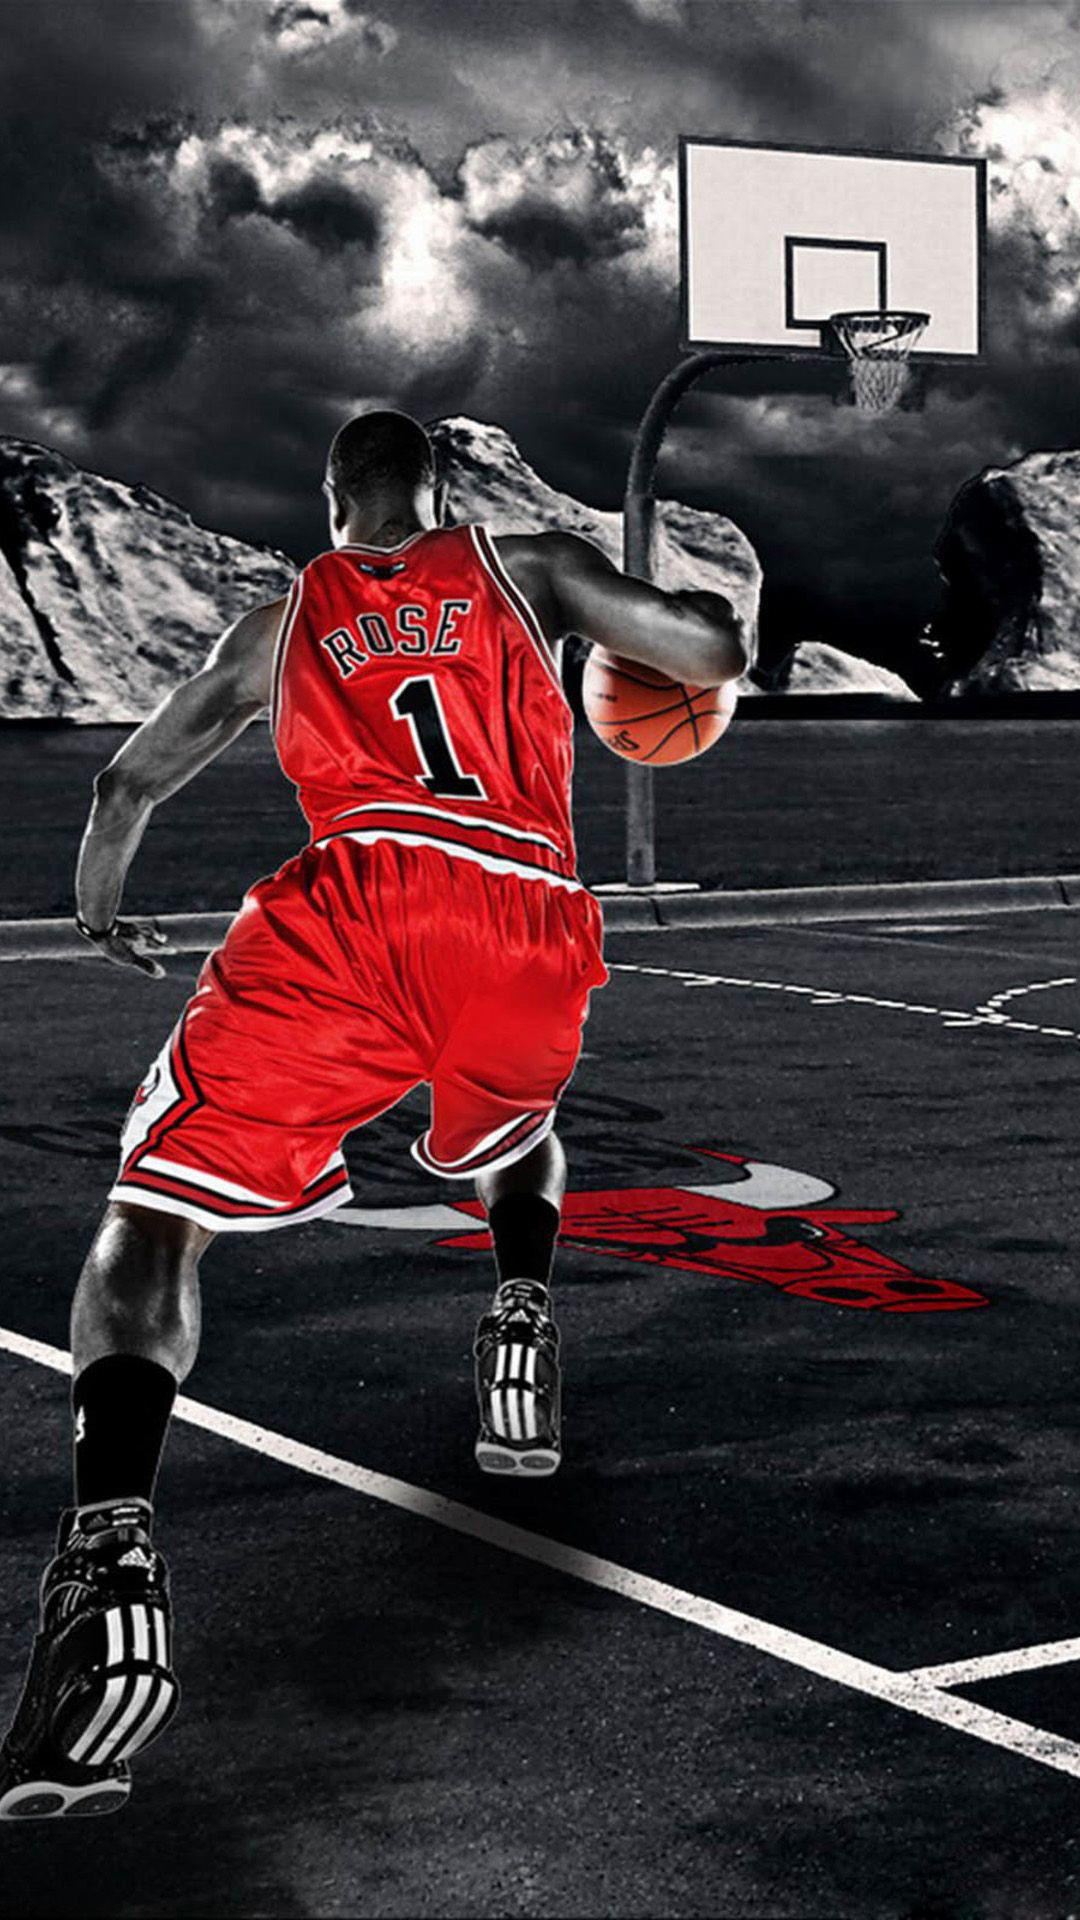 Cool Sports Wallpapers for iPhone 